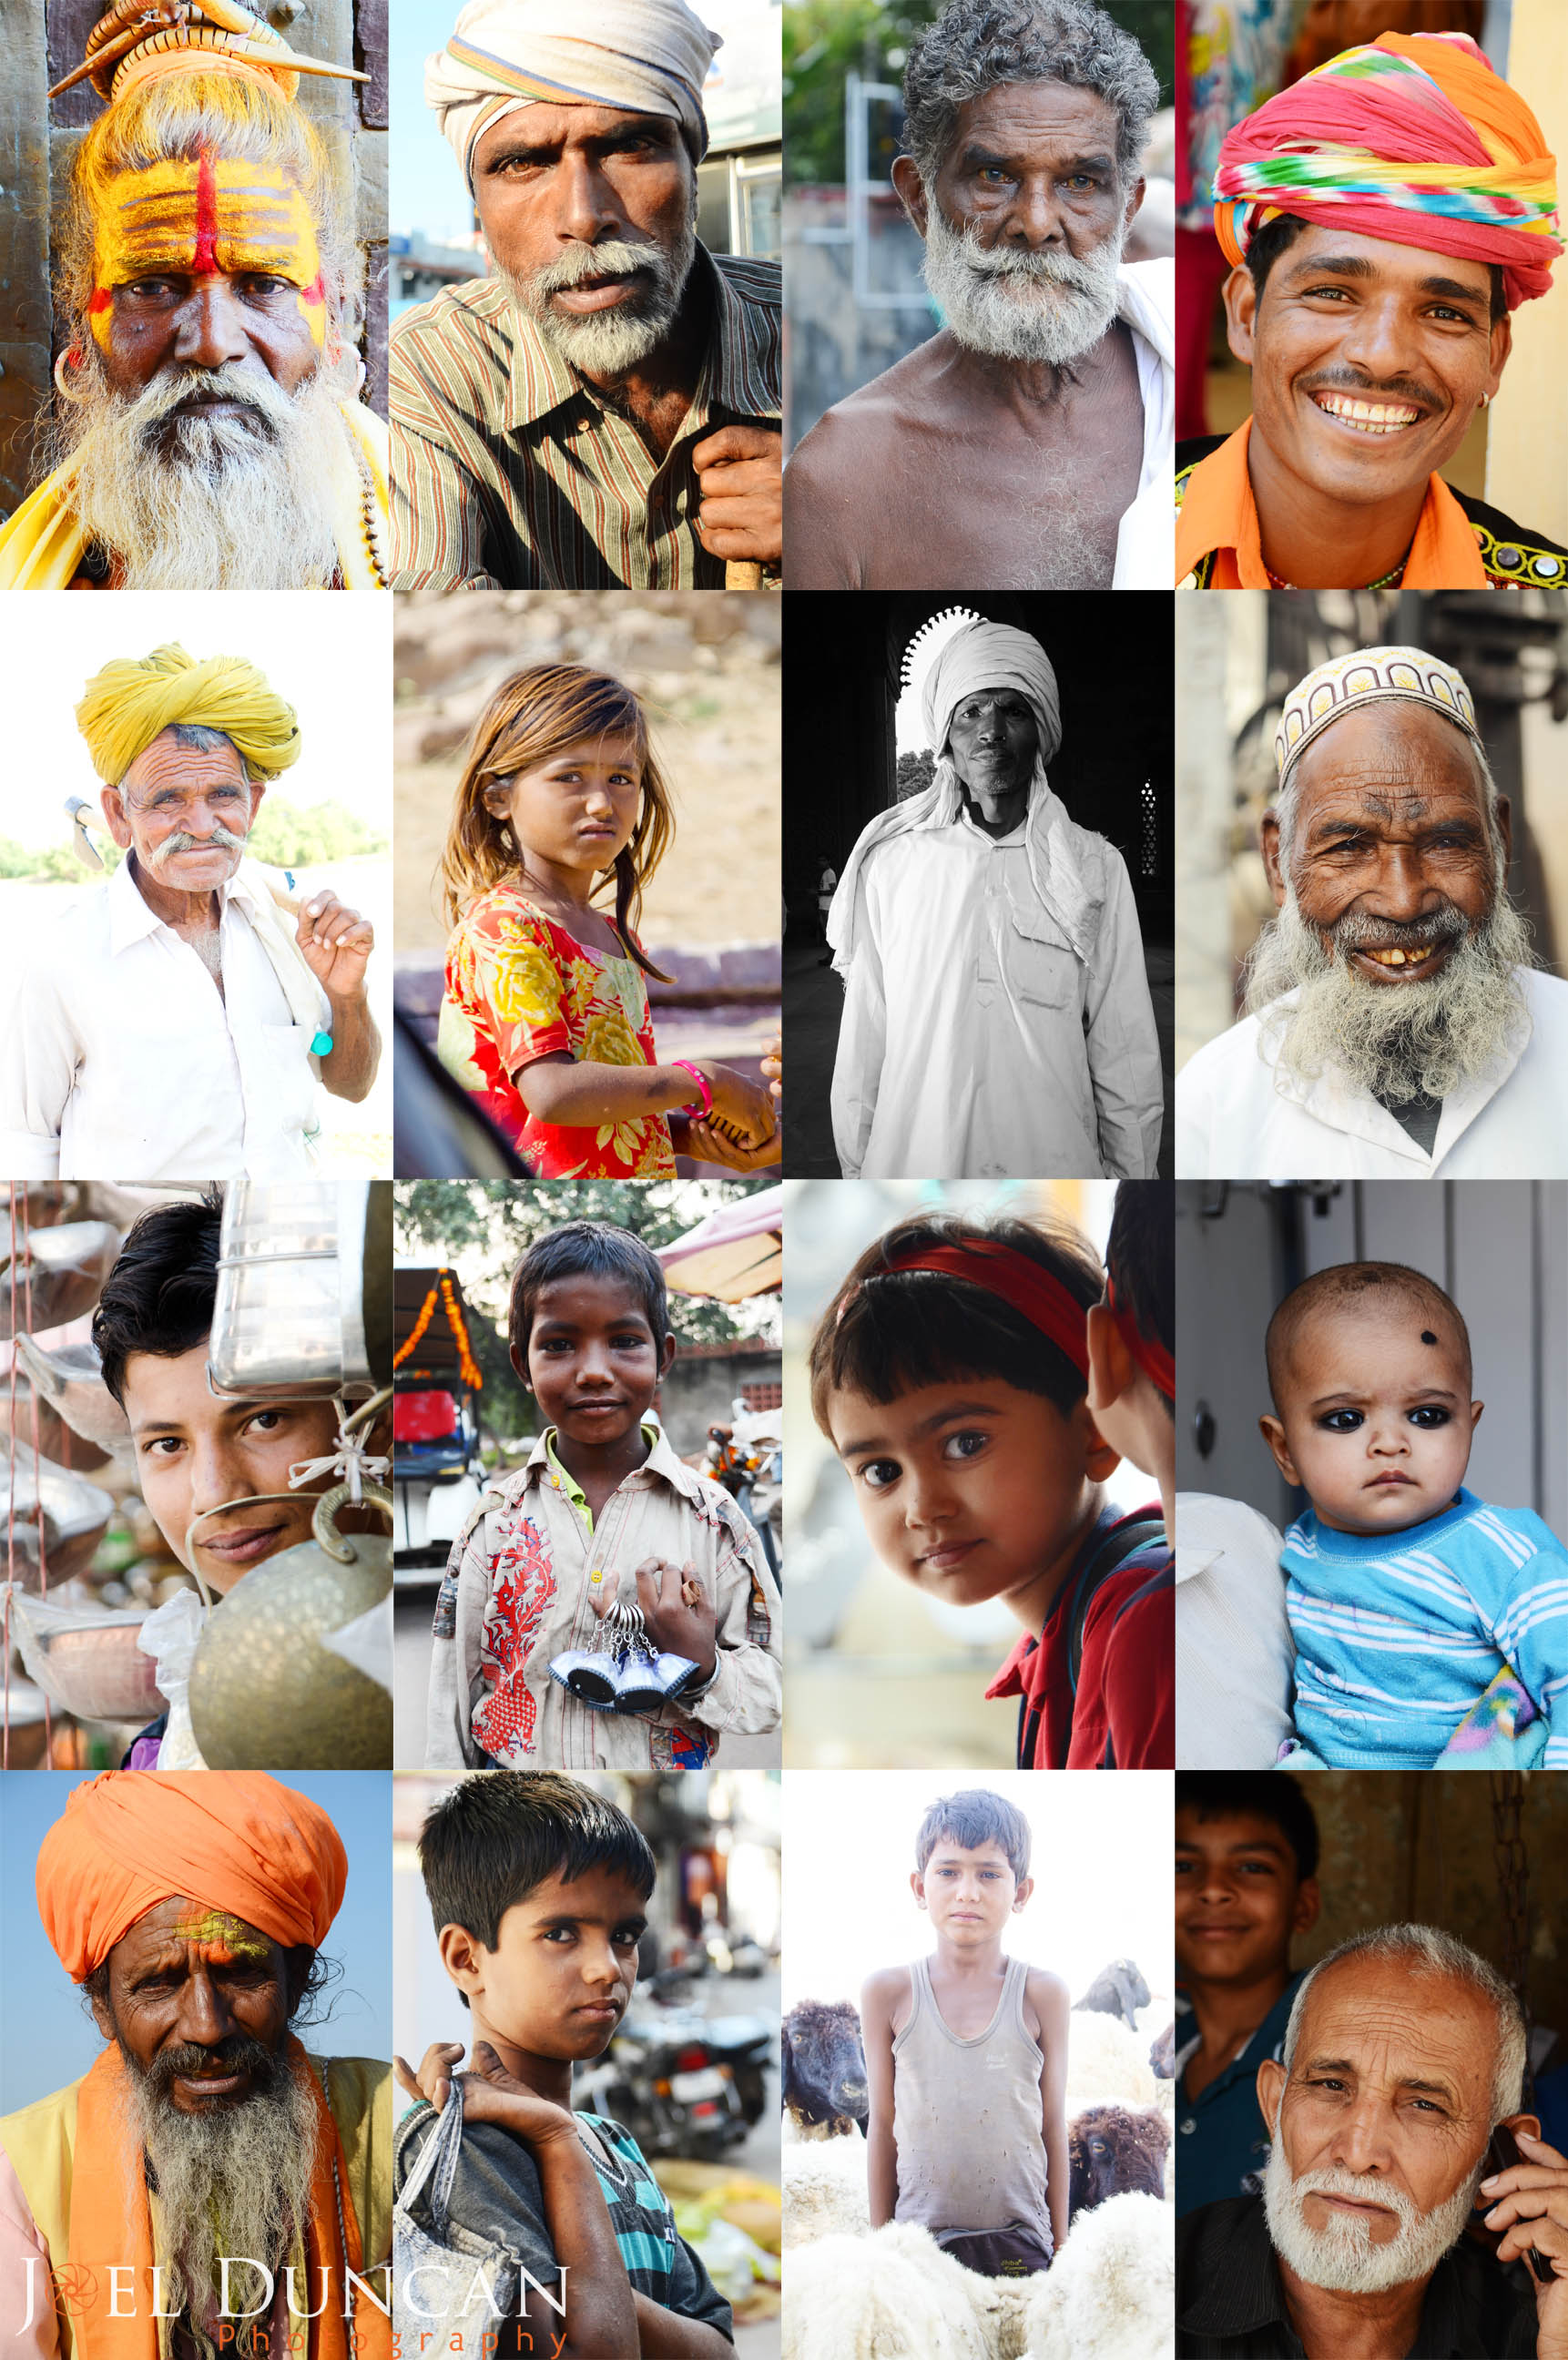 Facing the Streets India – Street Portrait Photography from India